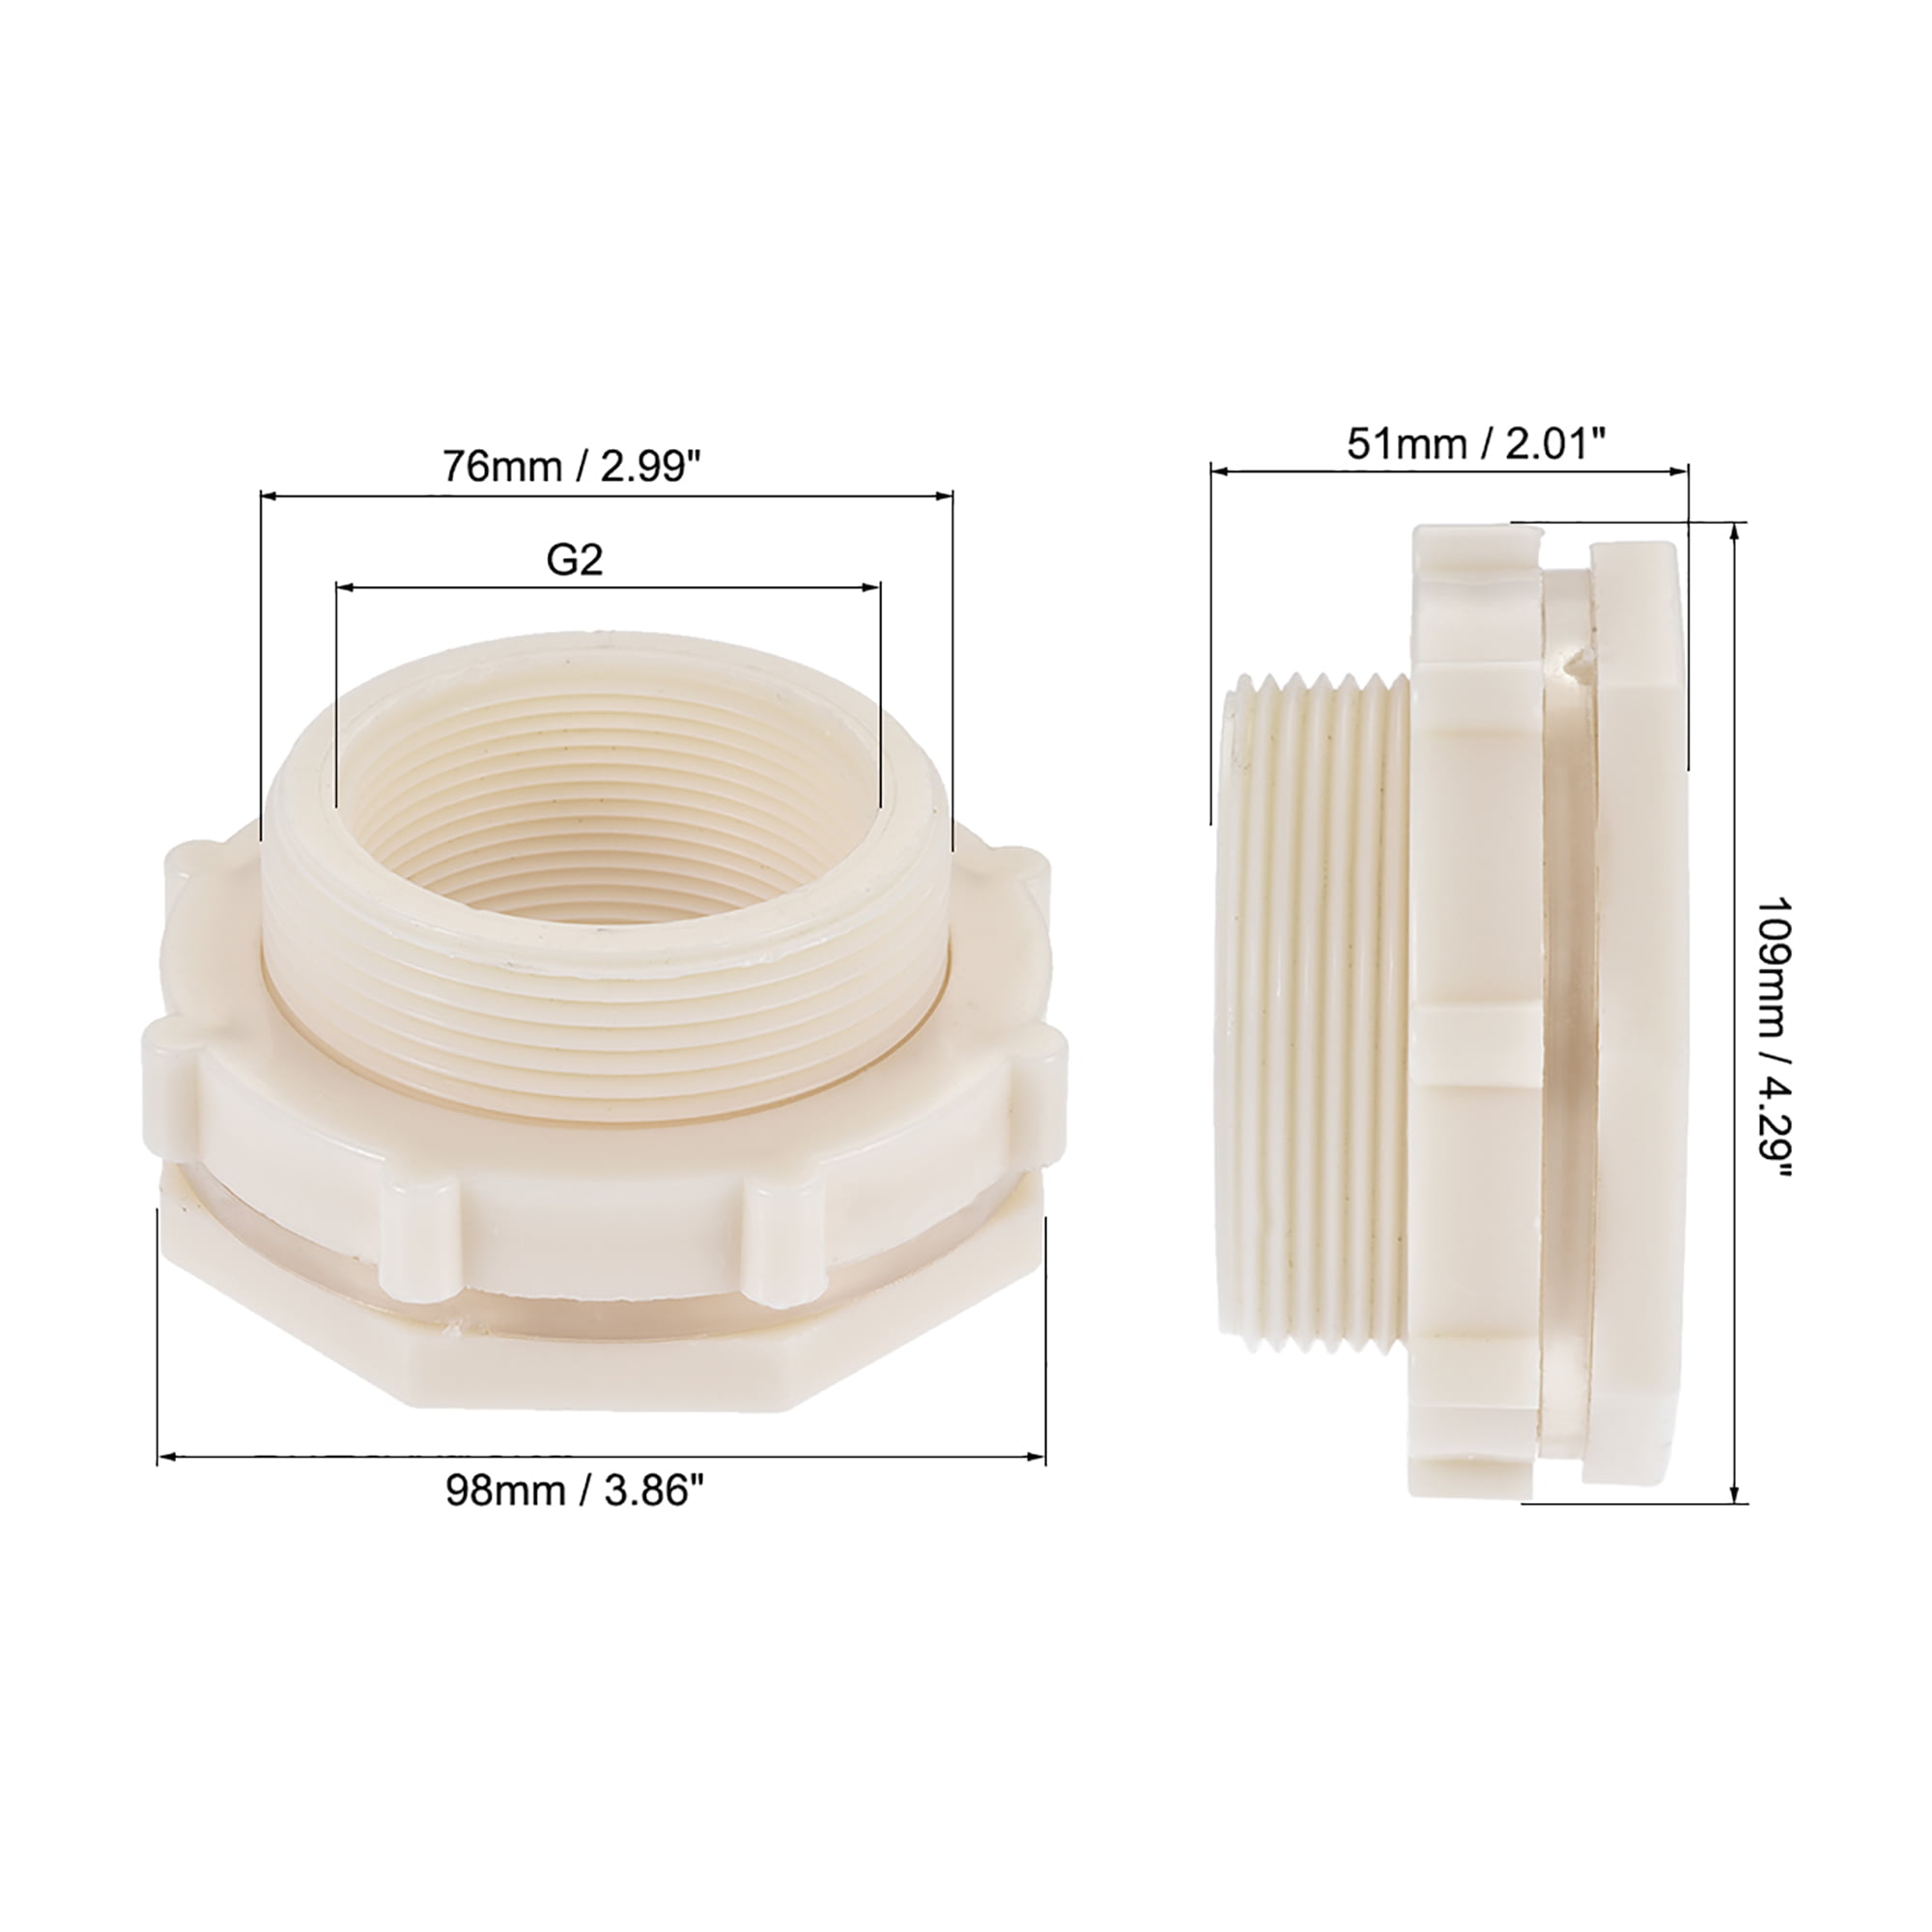 G2 Female 2.99 Male White PVC with Silicone Gasket and Pipe Connector for Water Tanks uxcell Bulkhead Fitting Tube Adaptor Fitting 